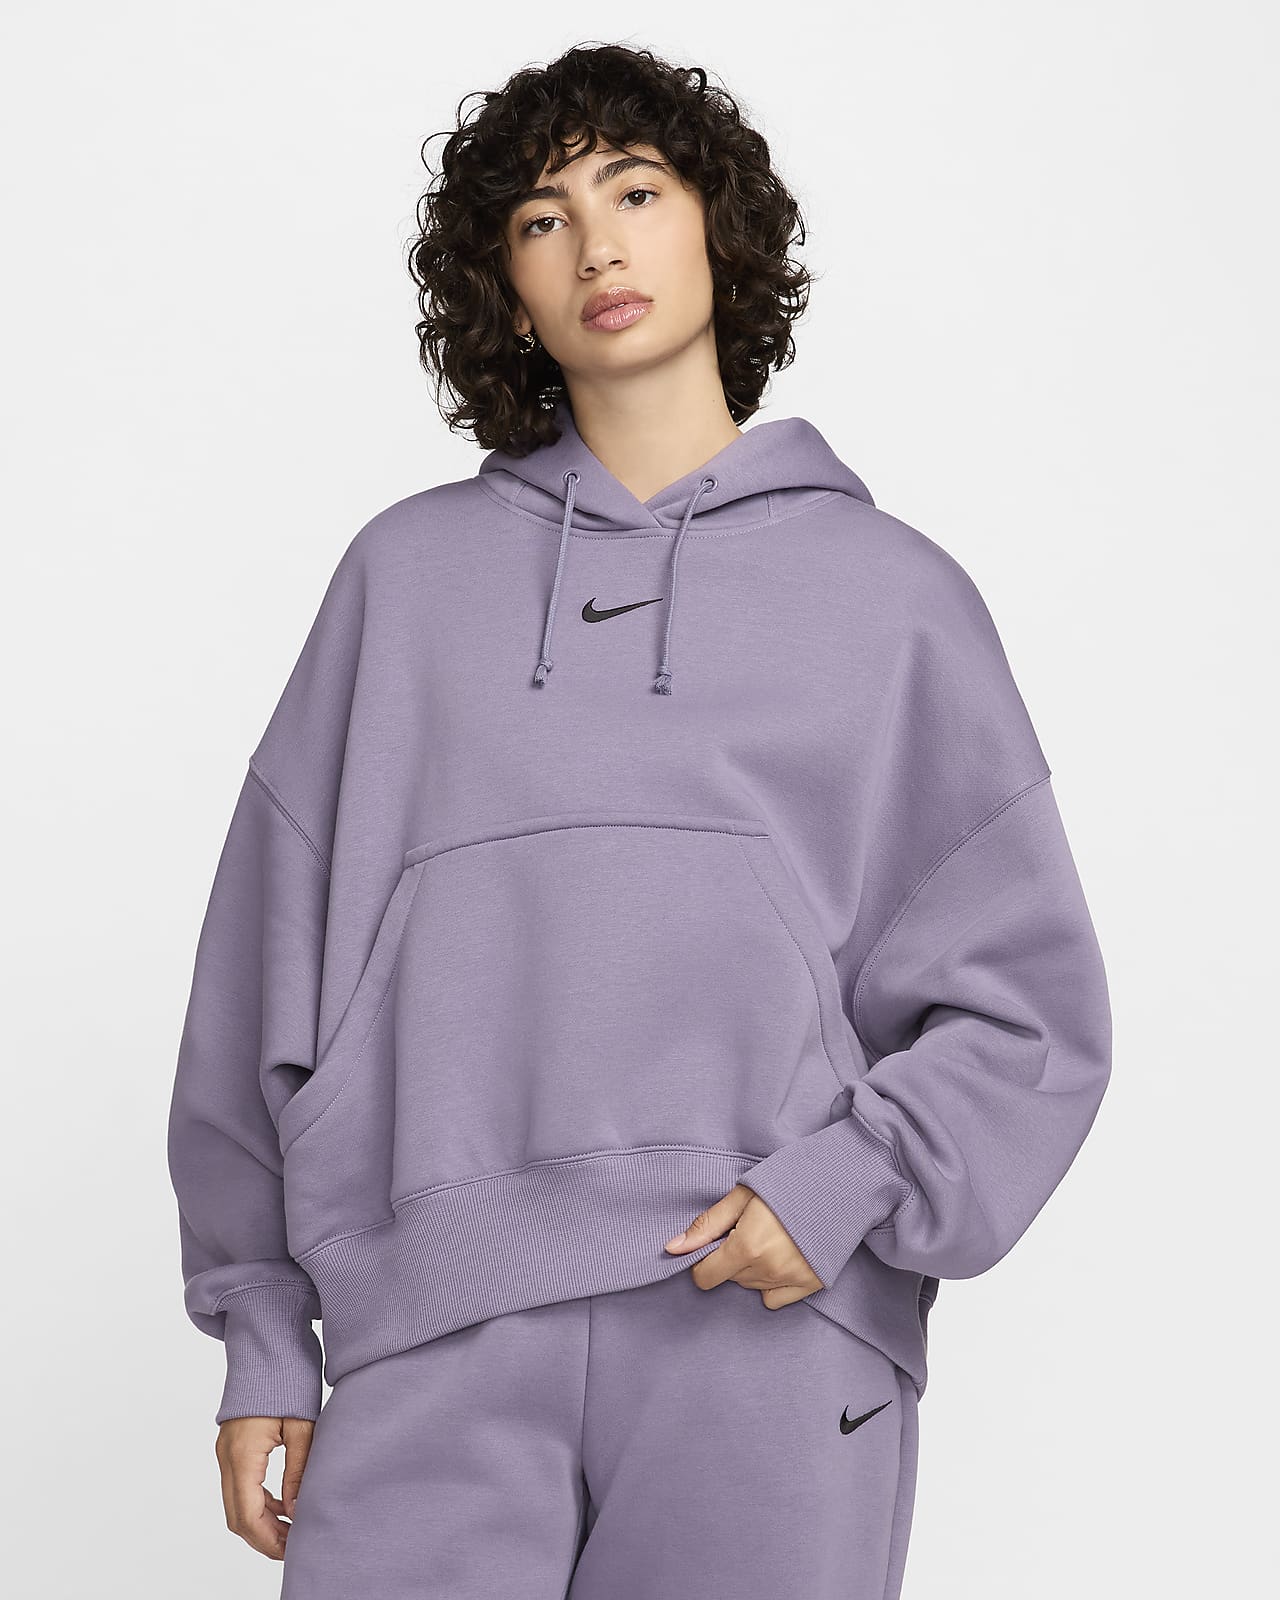 https://static.nike.com/a/images/t_PDP_1280_v1/f_auto,q_auto:eco/01f4b75d-ed61-4703-aa85-15fee1777187/sportswear-phoenix-fleece-womens-over-oversized-pullover-hoodie-RrzVXL.png